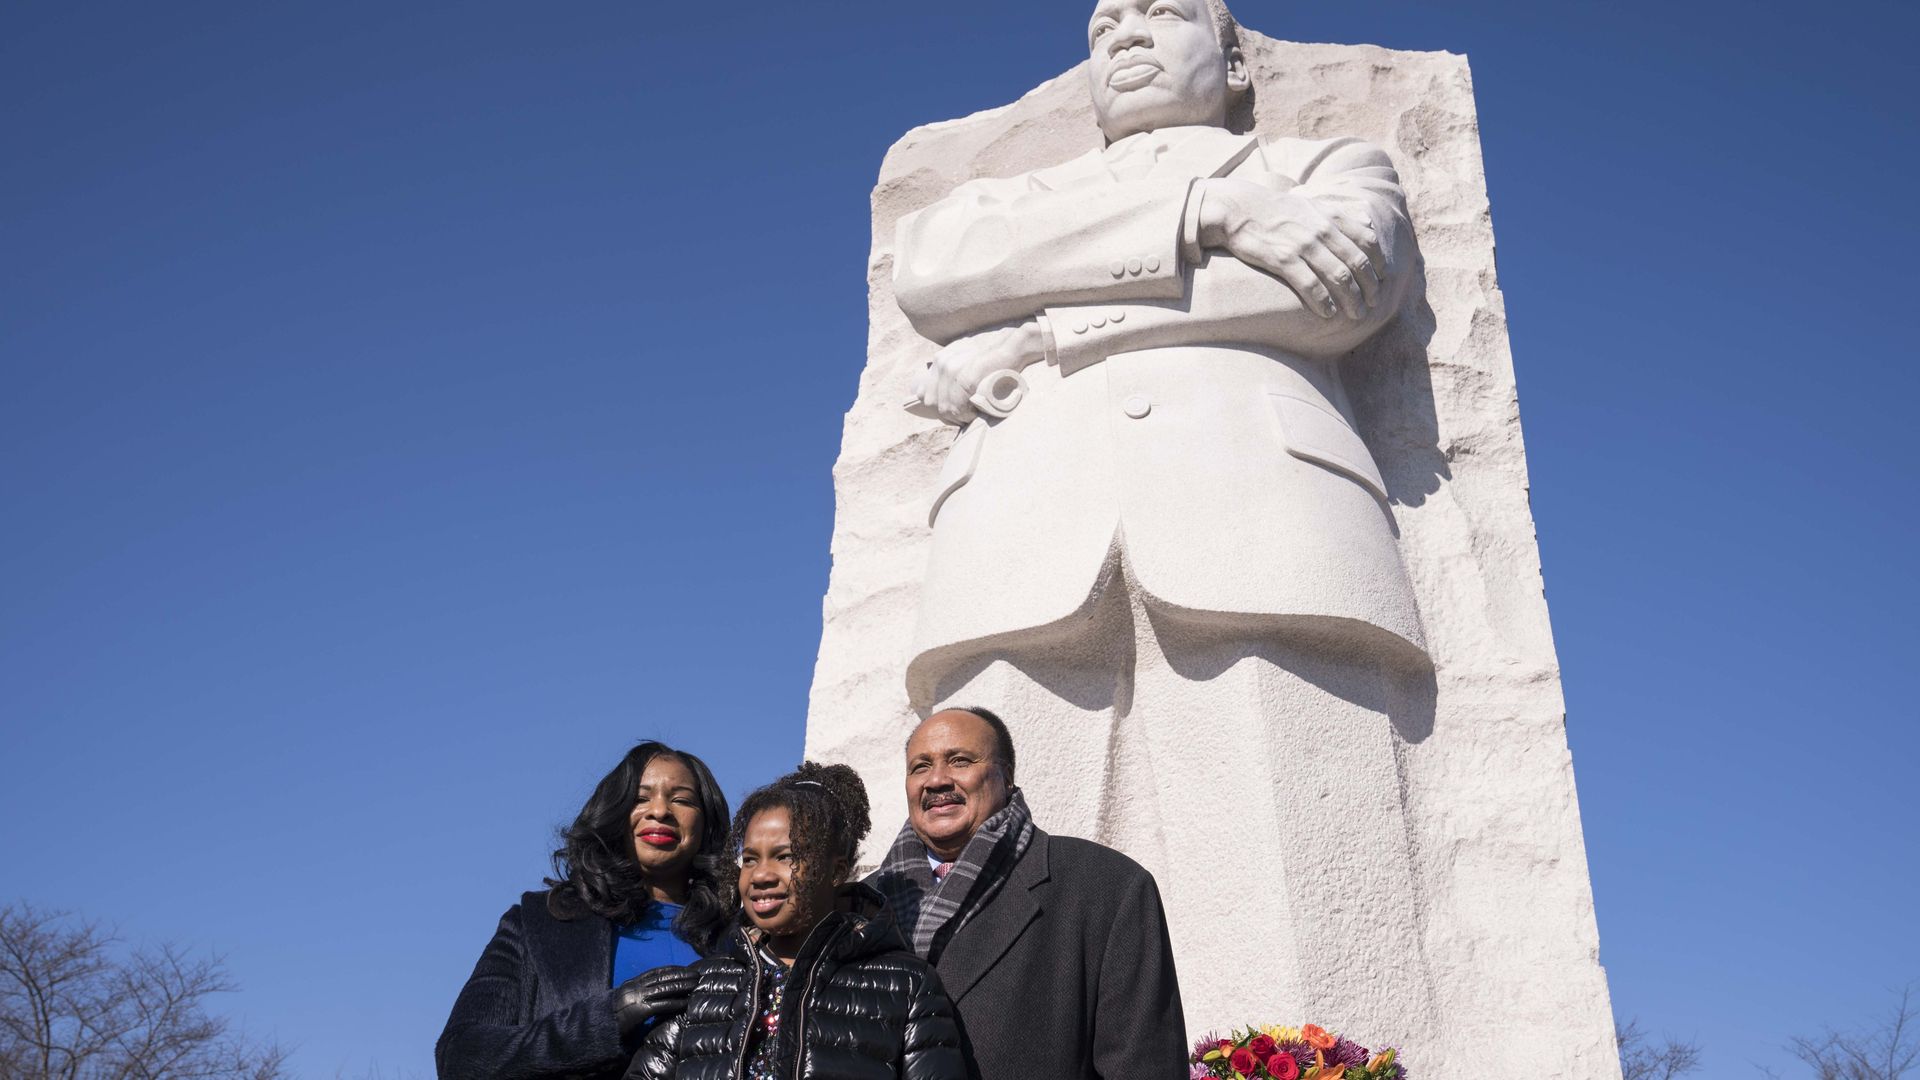 Martin Luther King III, Arndrea King and their daughter, Yolanda Renee King, are seen at the federal memorial to MLK Jr.